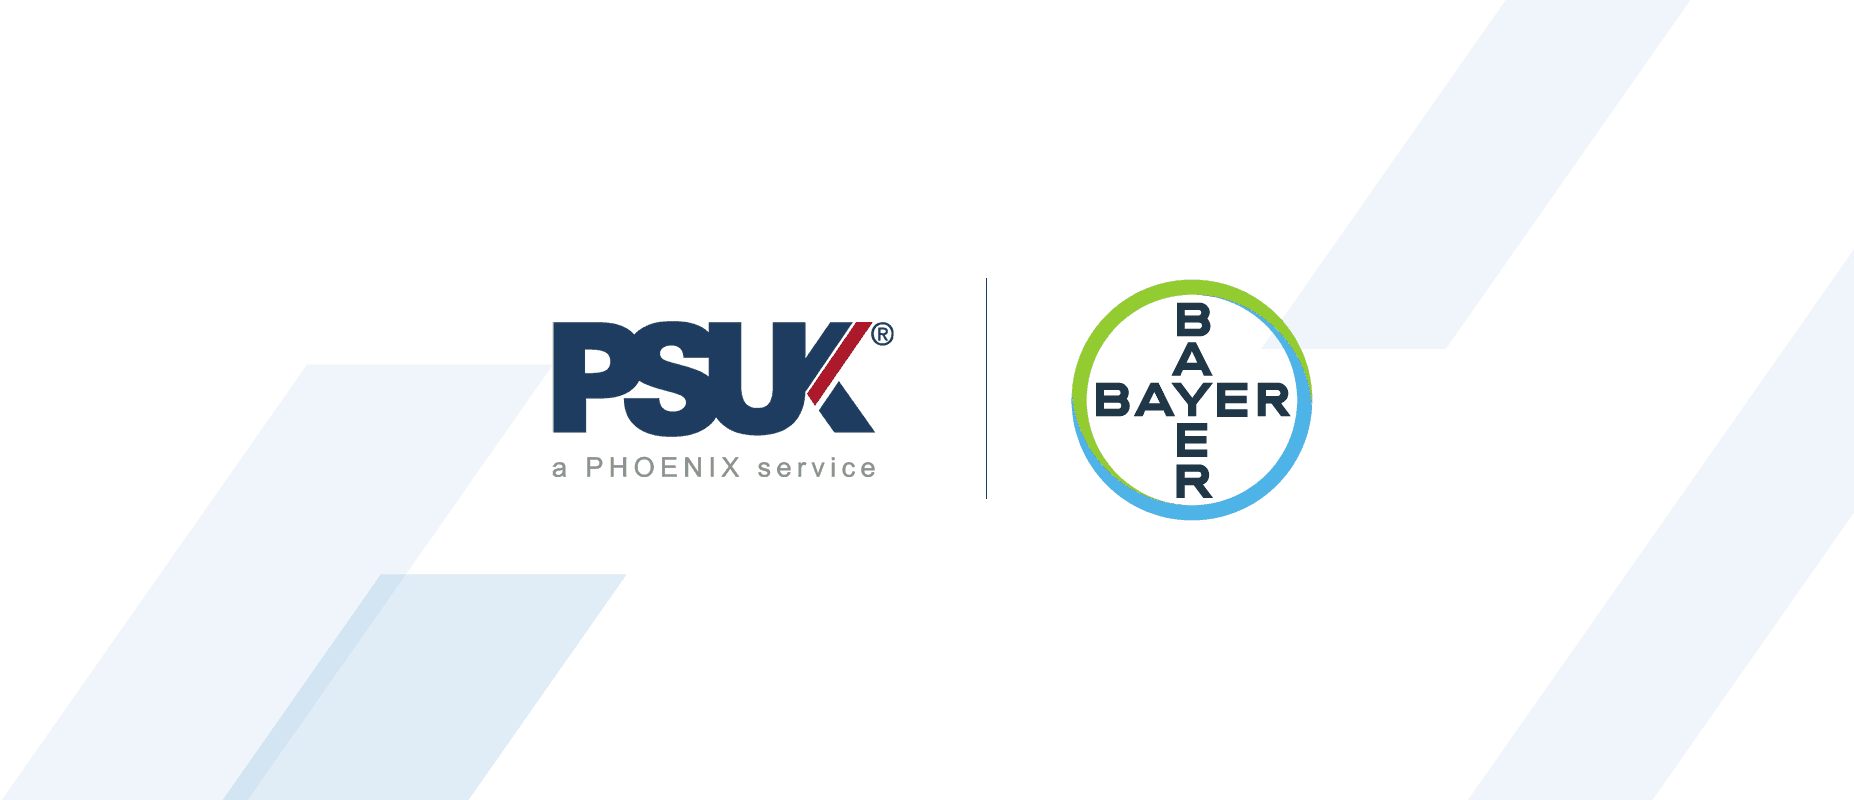 PS Bayer